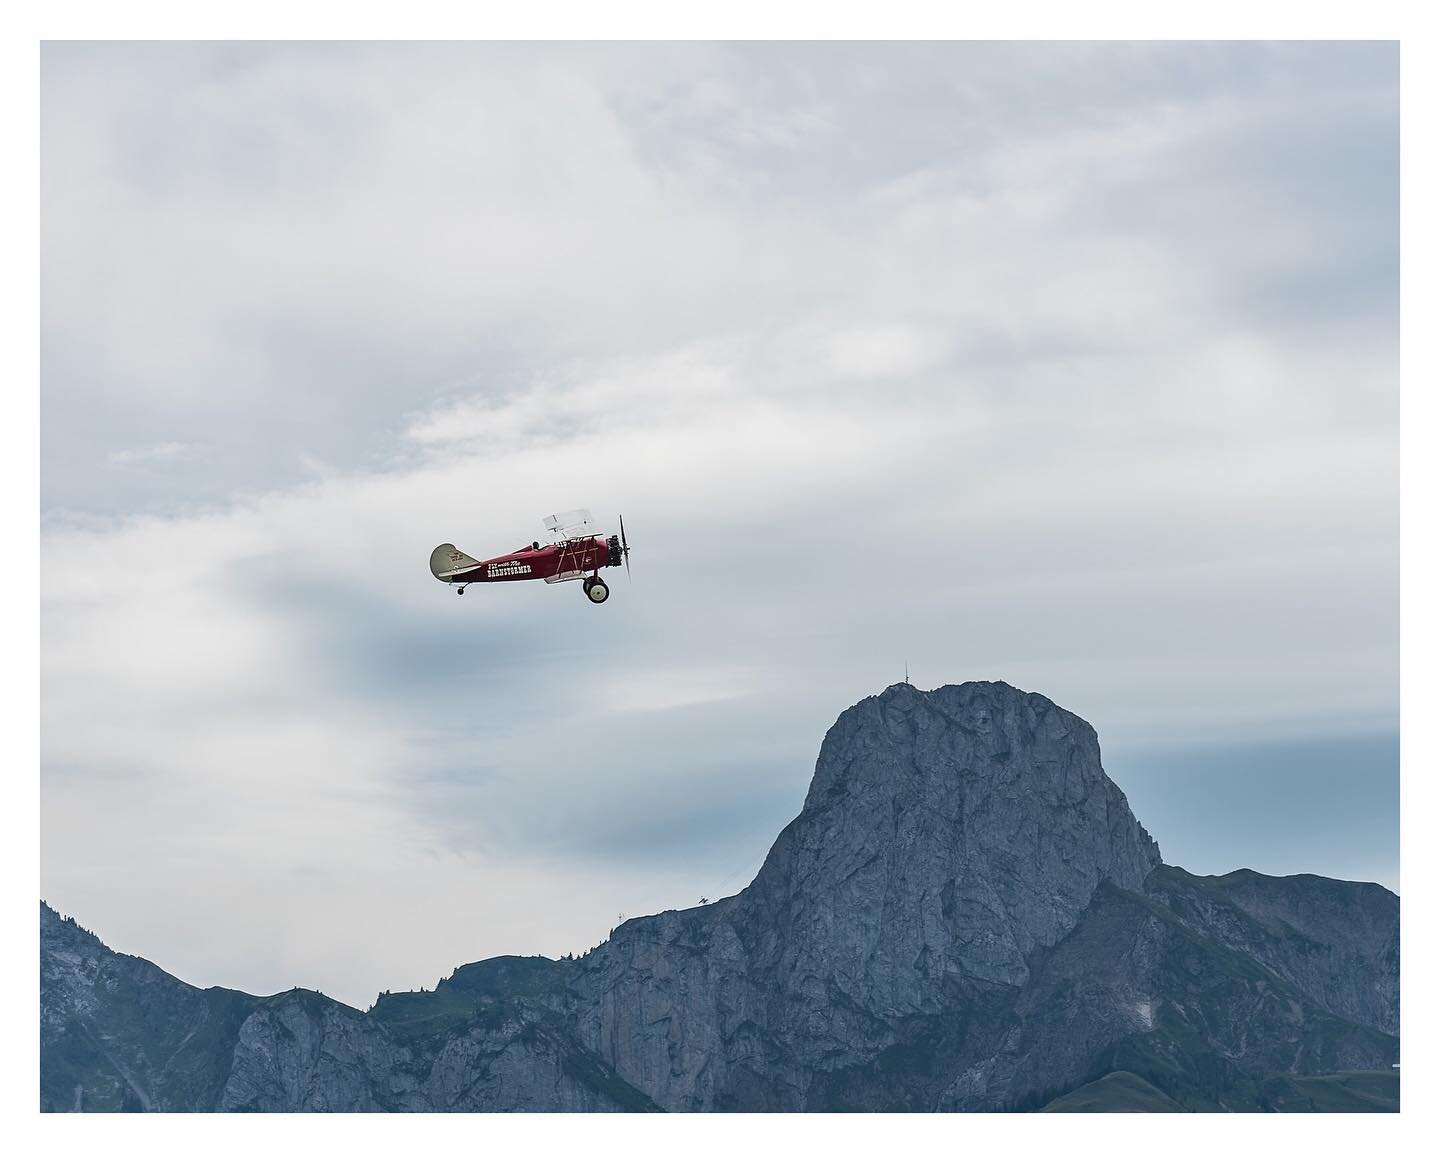 ~ Fligh high ~
An old classic airplane in front of the Stockhorn. This and many other classic planes you could see at the air thun 2019.
*
*
*
#barnstormer #klassisch #oldtimerplane #stockhornbahn #stockhorn #stockhornkette  #stockhornview #flywithth